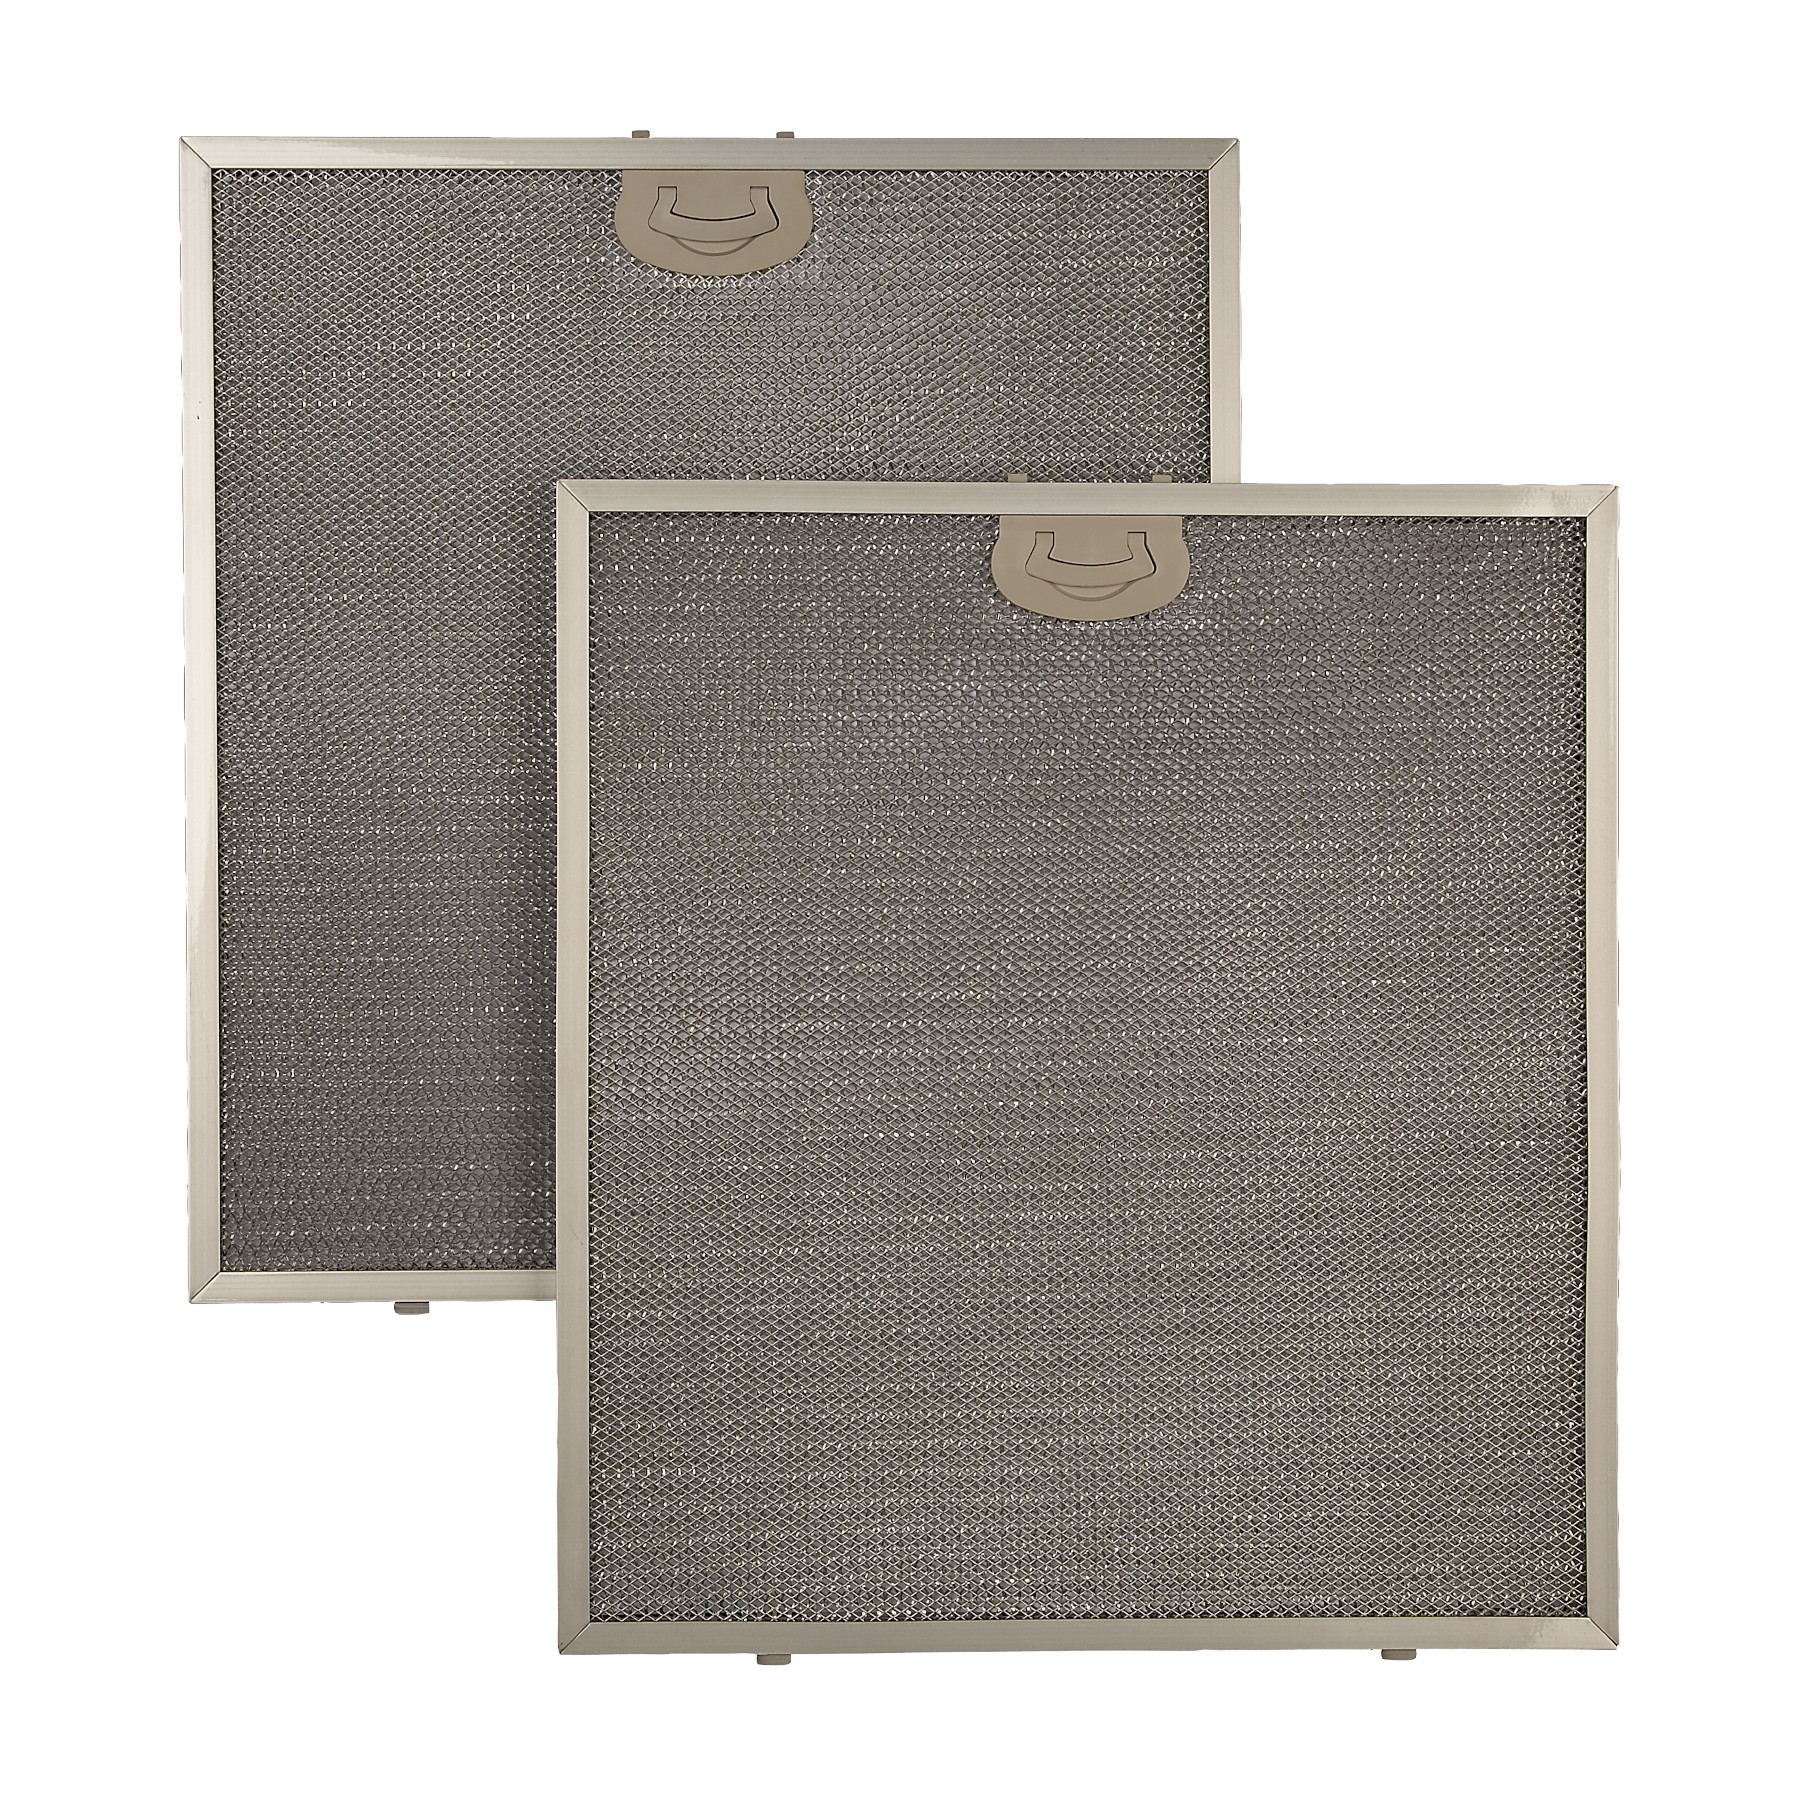 **DISCONTINUED** Aluminum Replacement Grease Filter with Antimicrobial Protection for 36-Inch QP1 Series